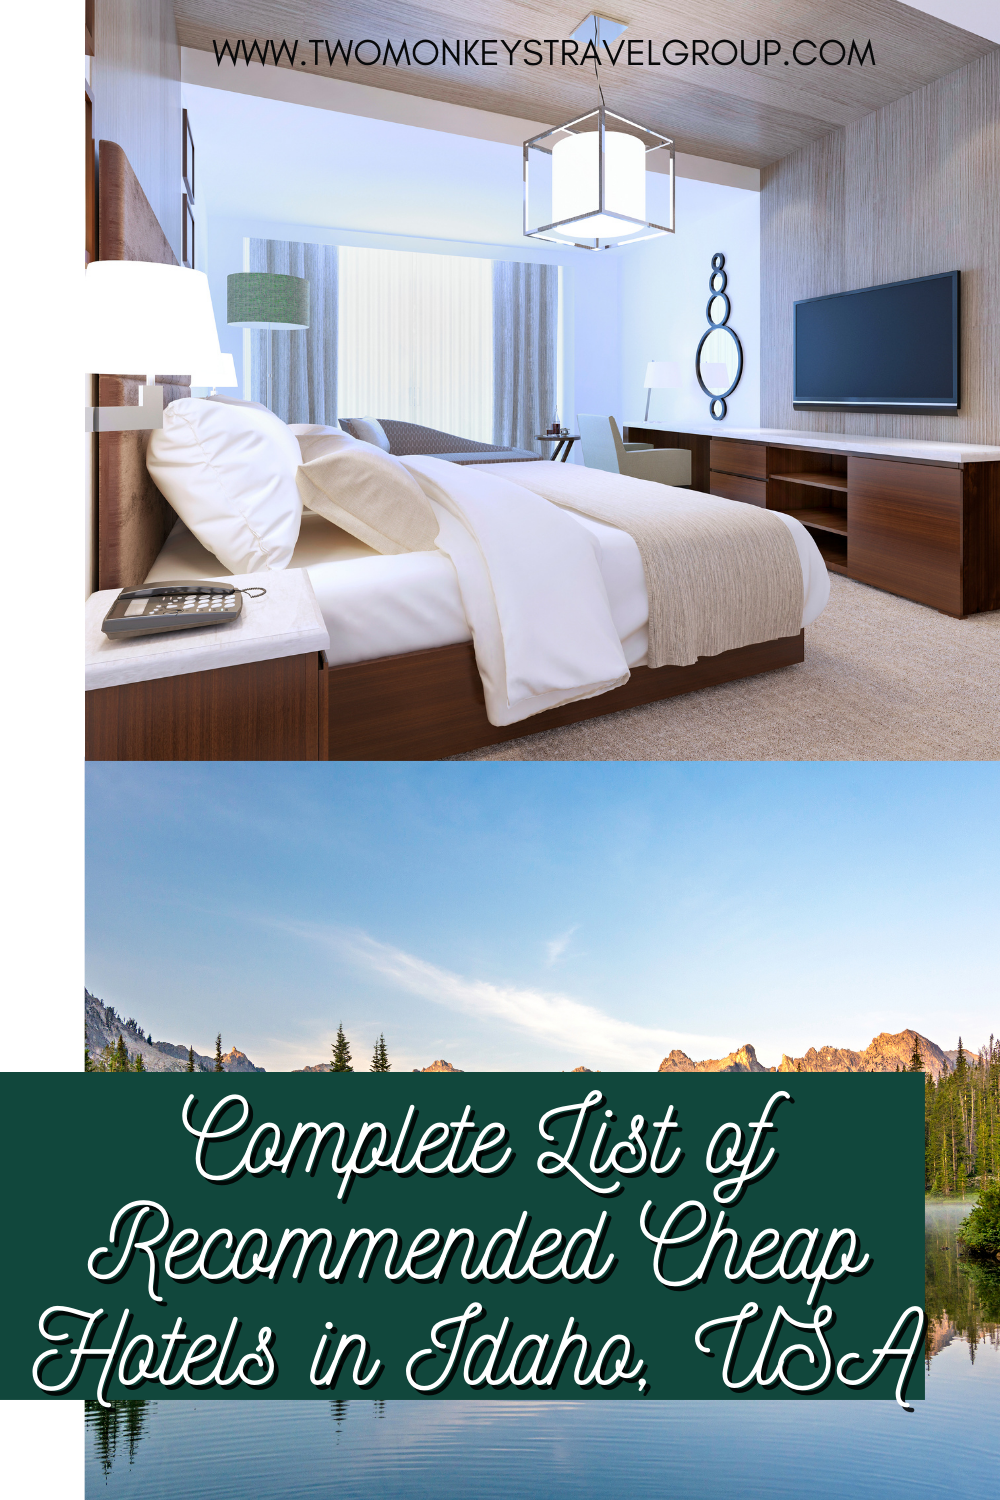 Complete List of Recommended Cheap Hotels in Idaho, USA